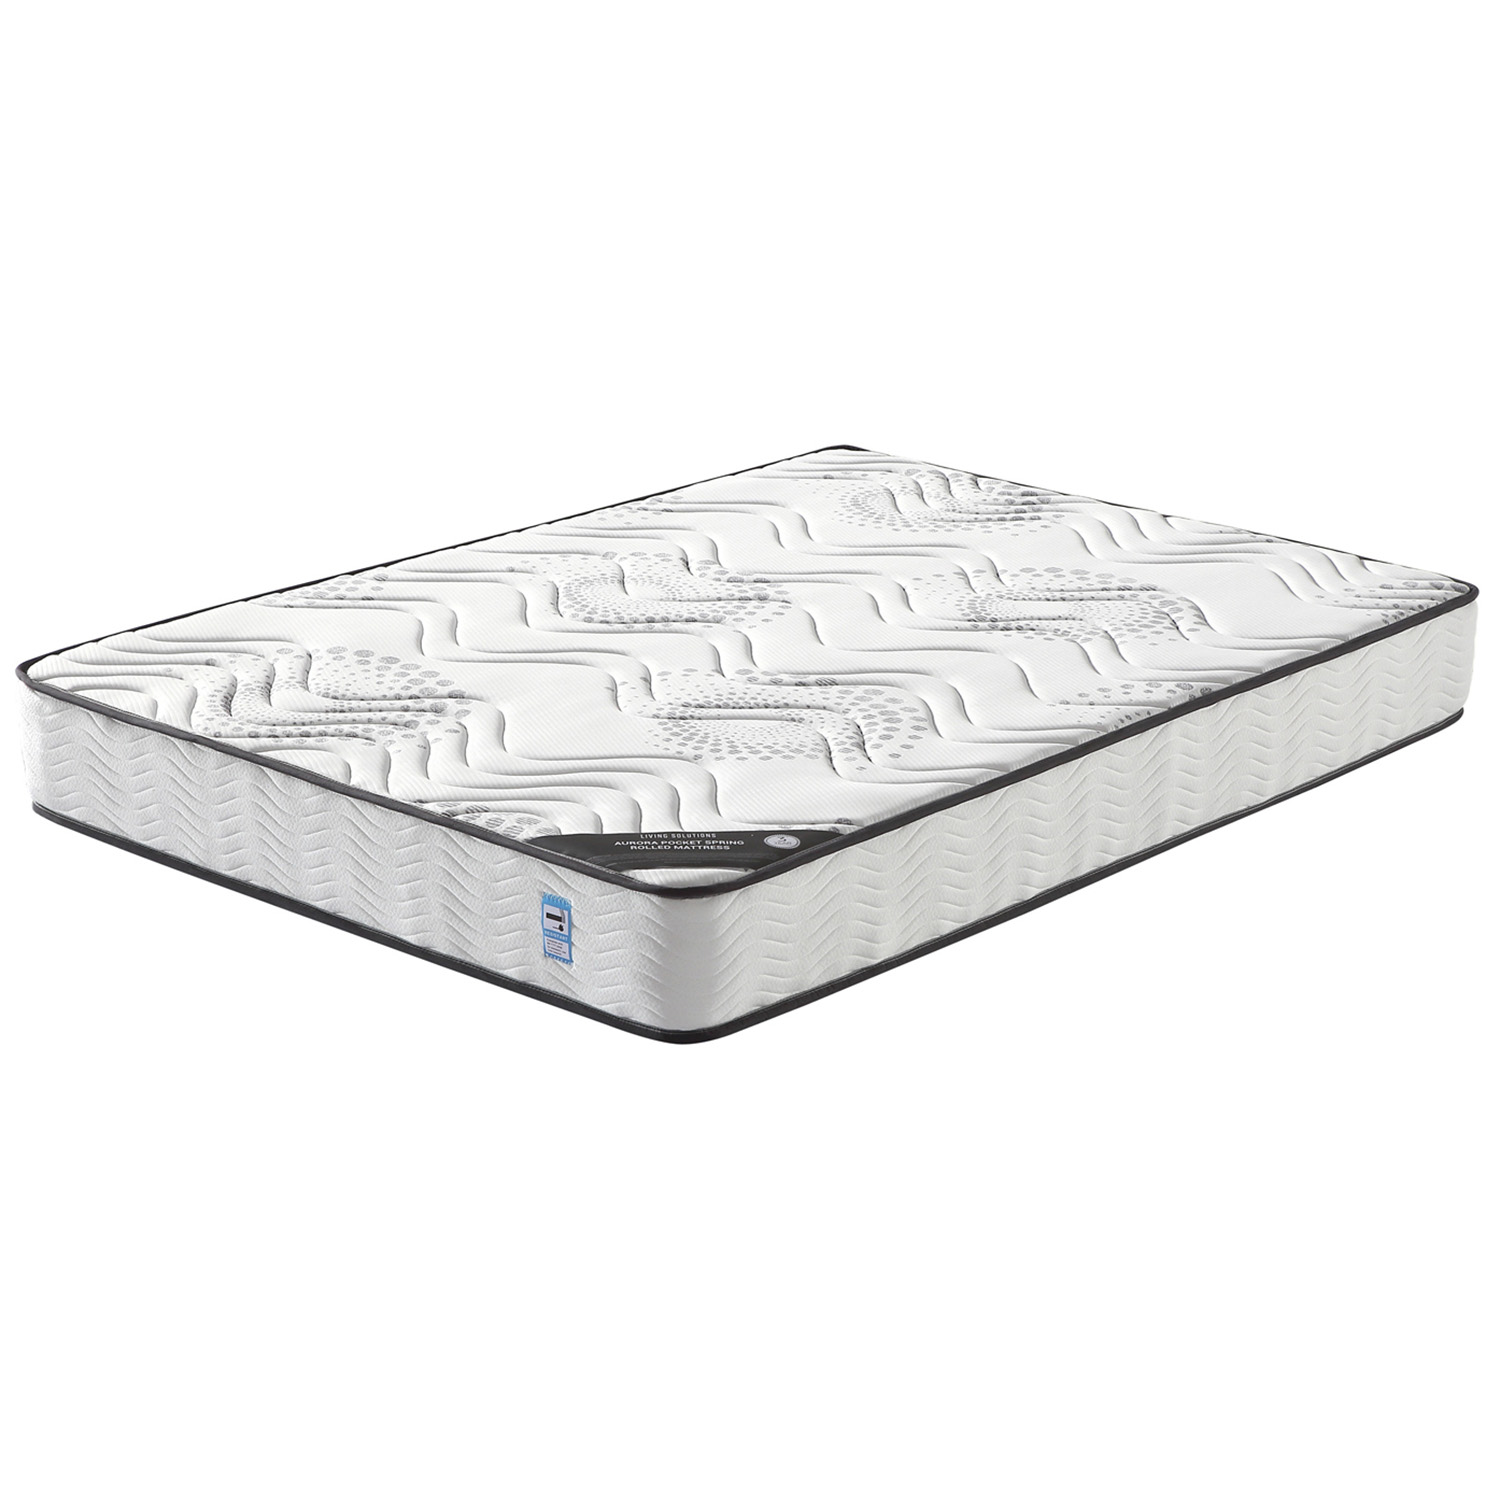 Living Solutions Aurora Double Pocket Spring Rolled Mattress Image 1